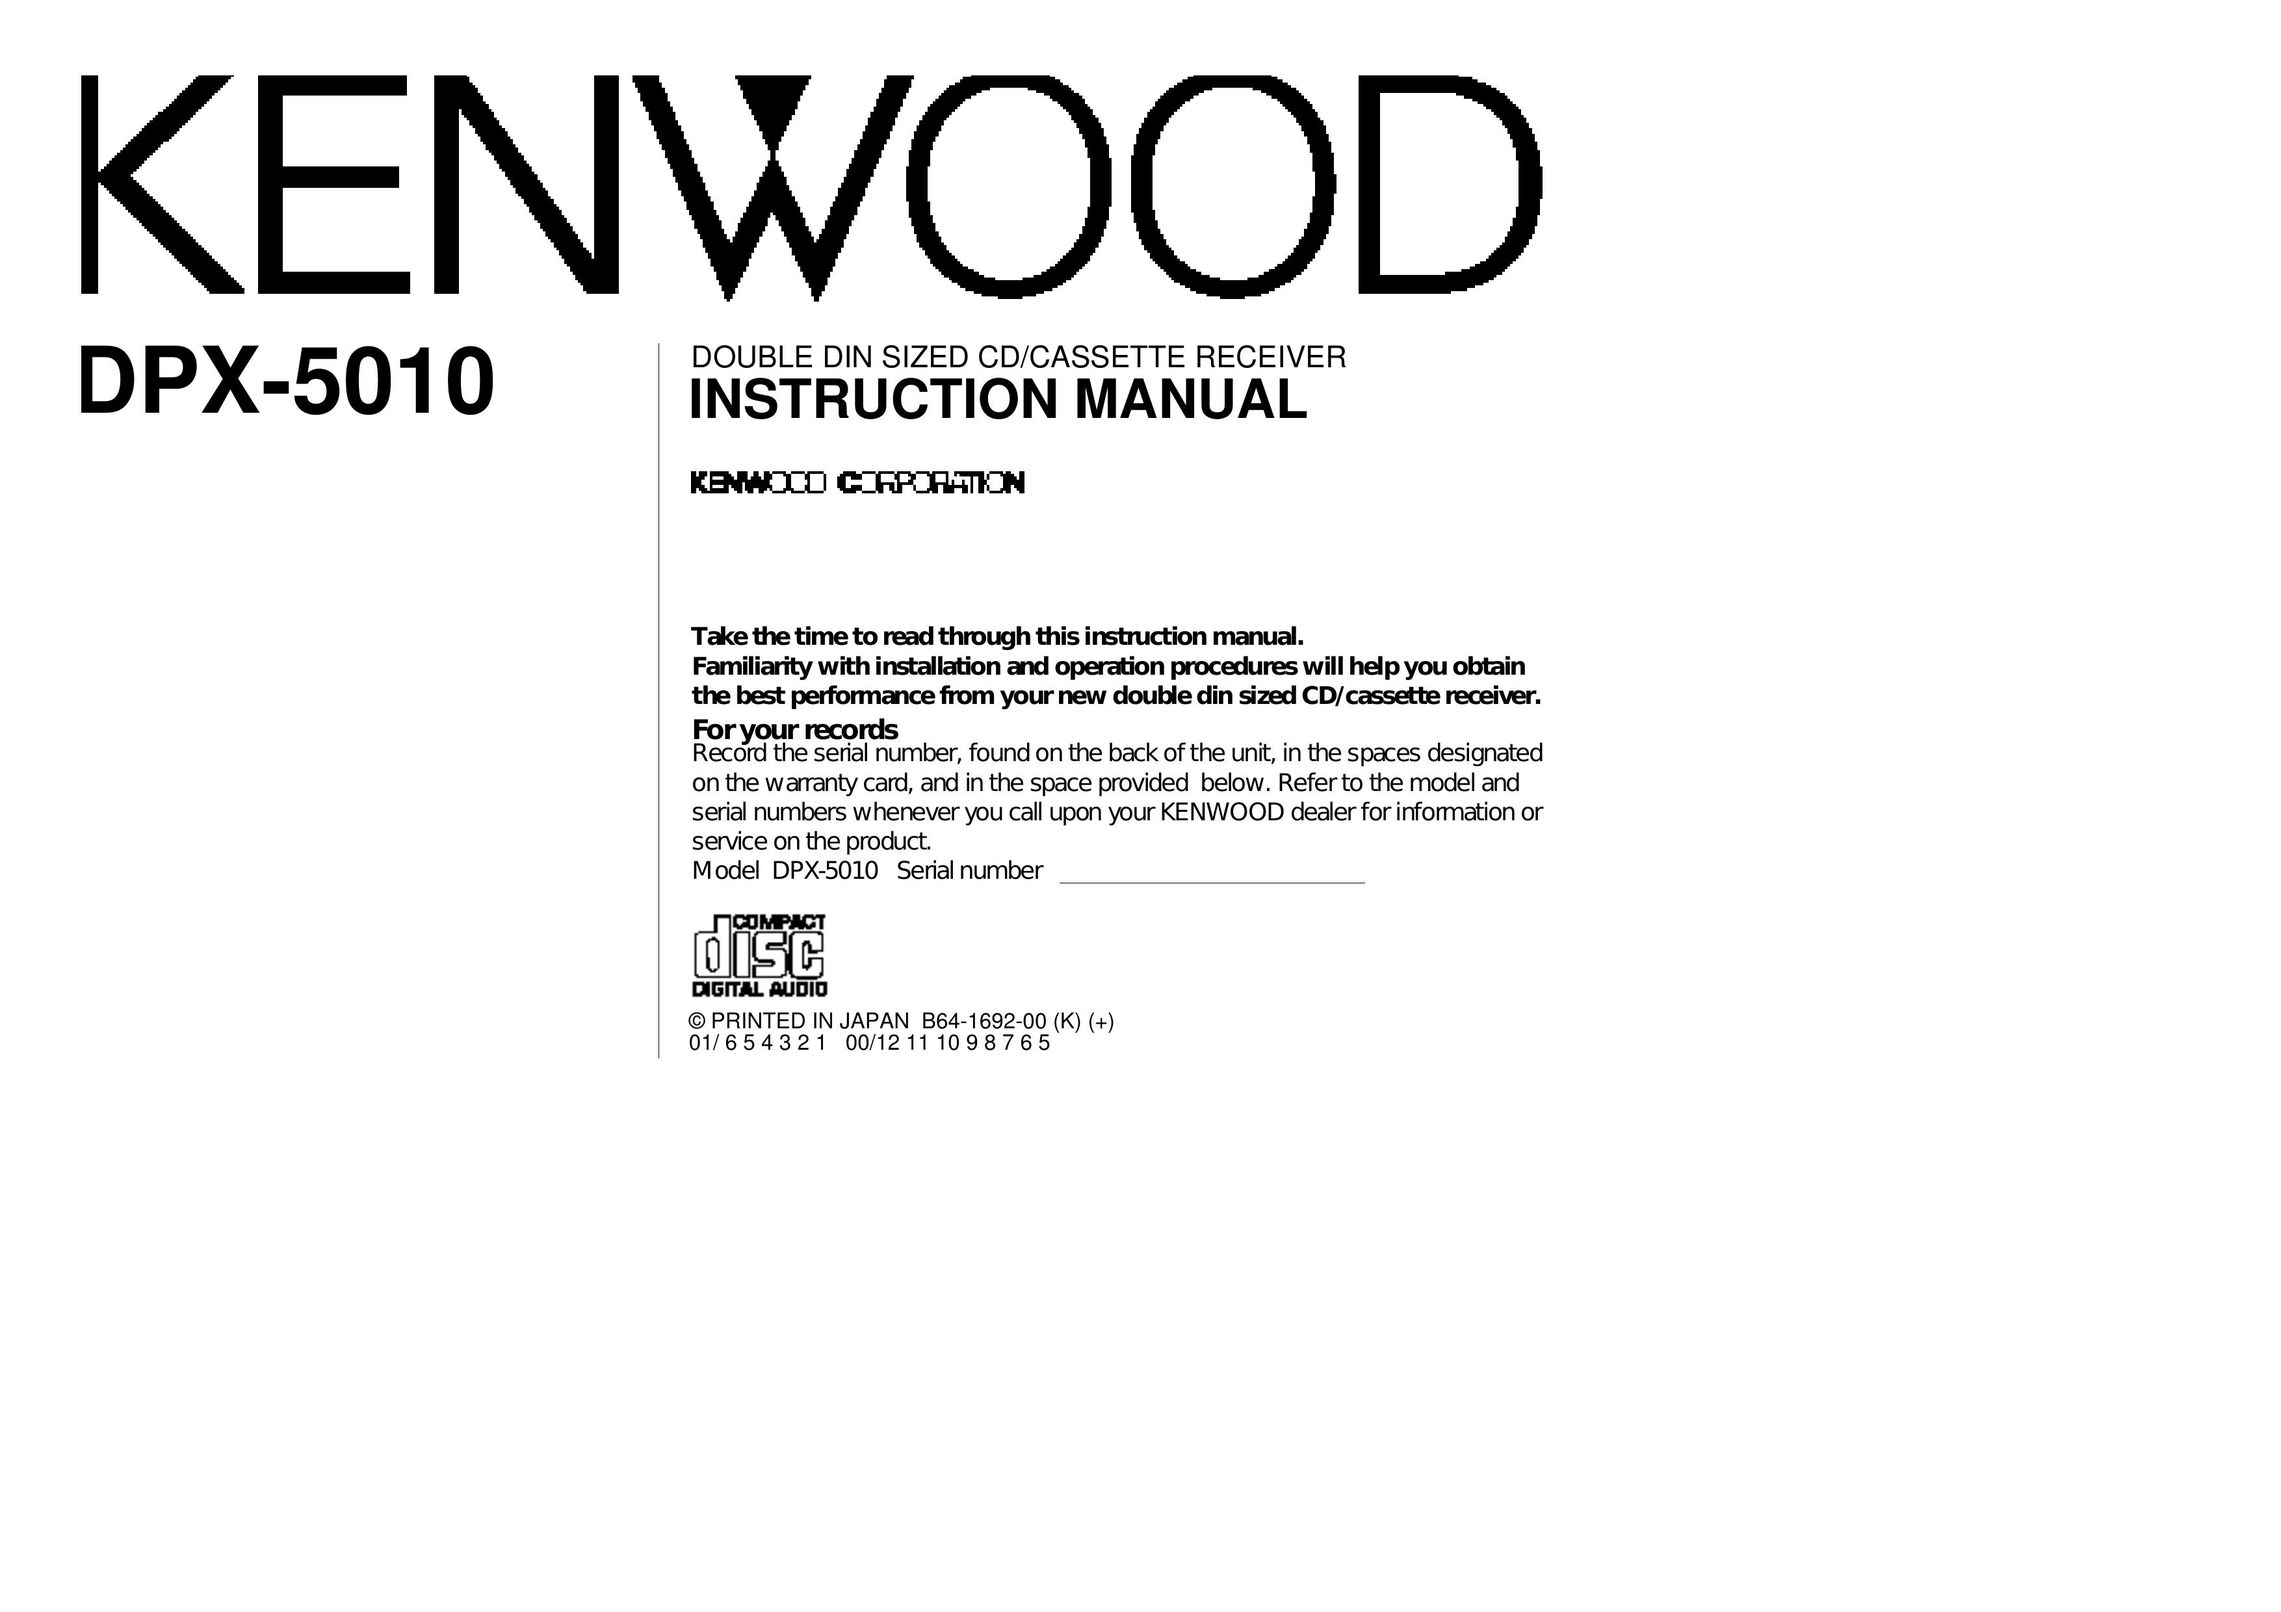 Kenwood DPX-5010 Car Stereo System User Manual